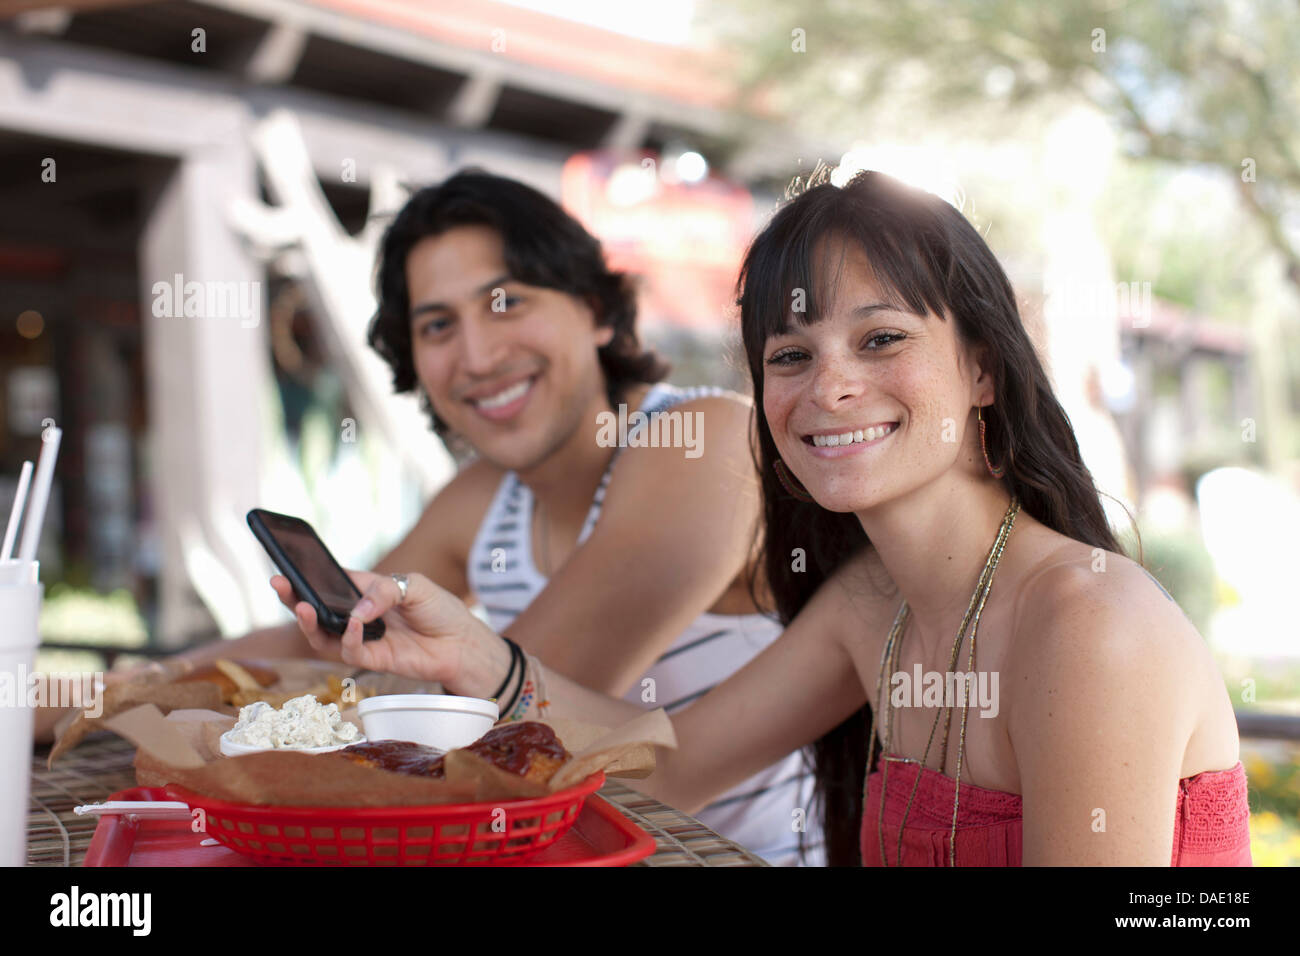 Young woman holding mobile phone in outdoor cafe, smiling Stock Photo